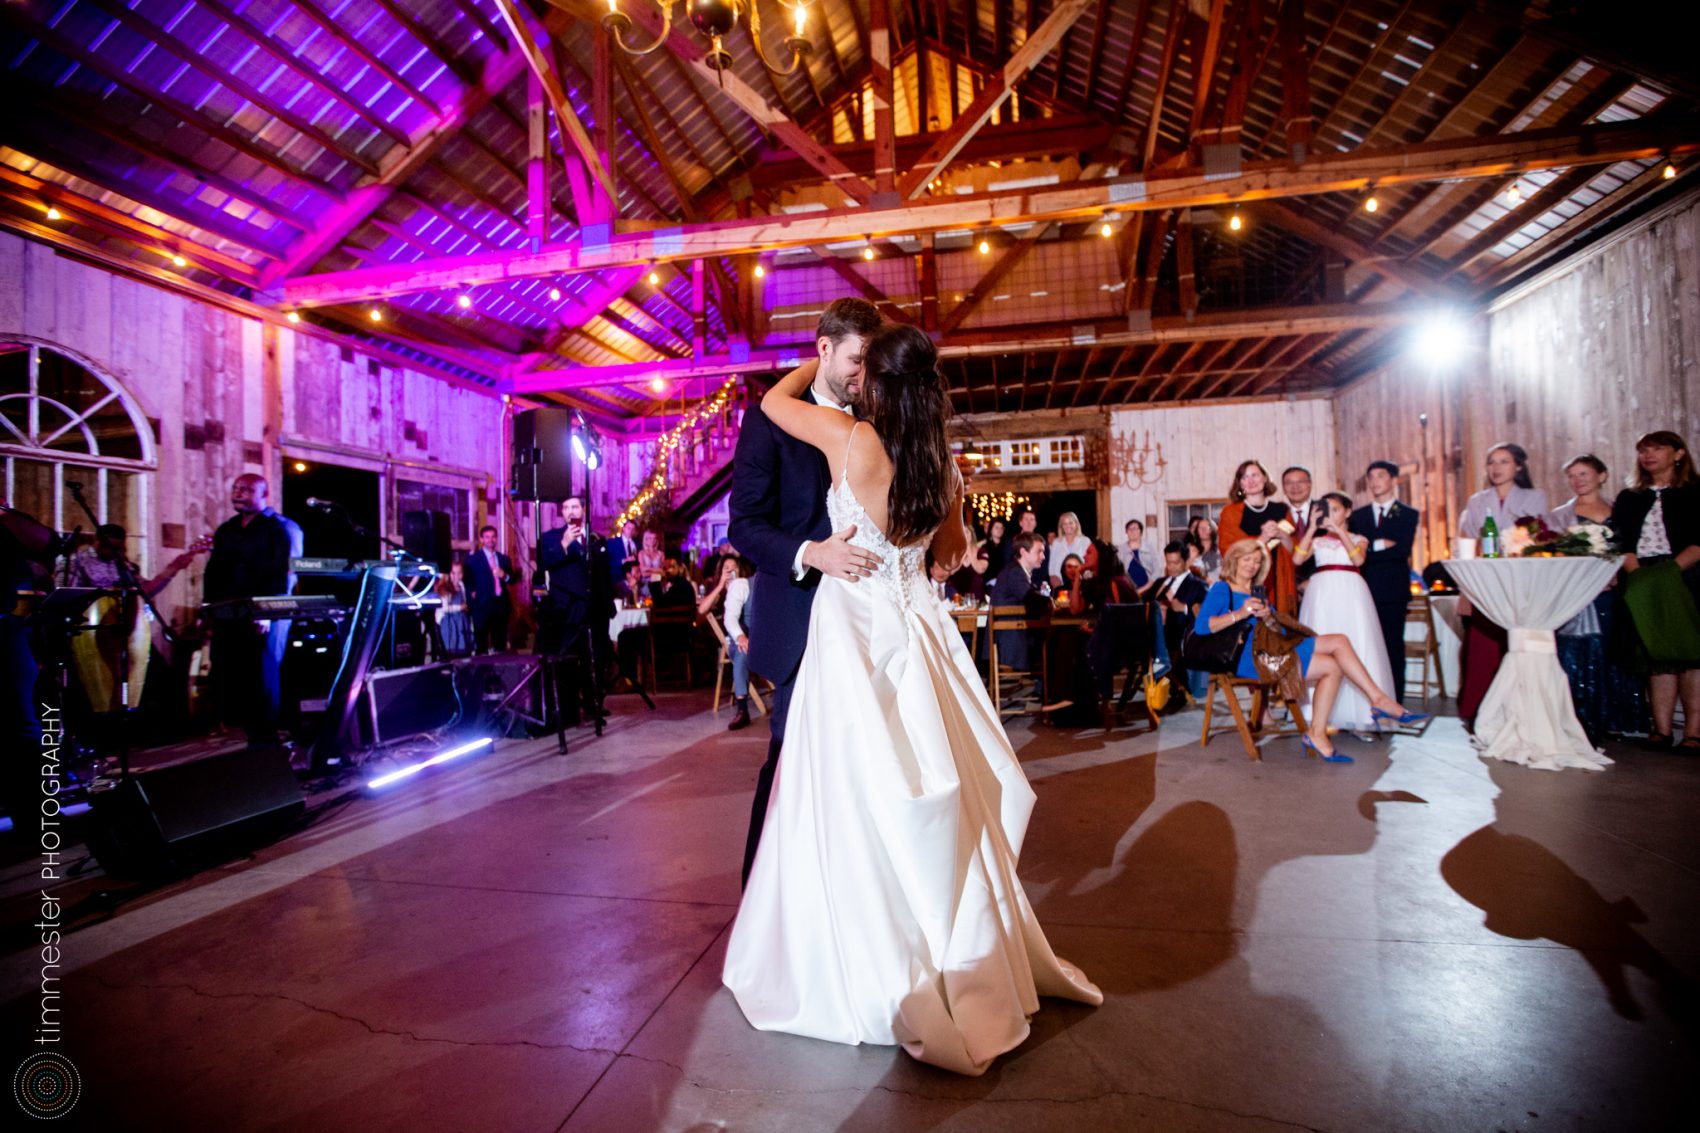 The bride and groom's first dance at Sassafras Fork Farm in Rougemont, NC.